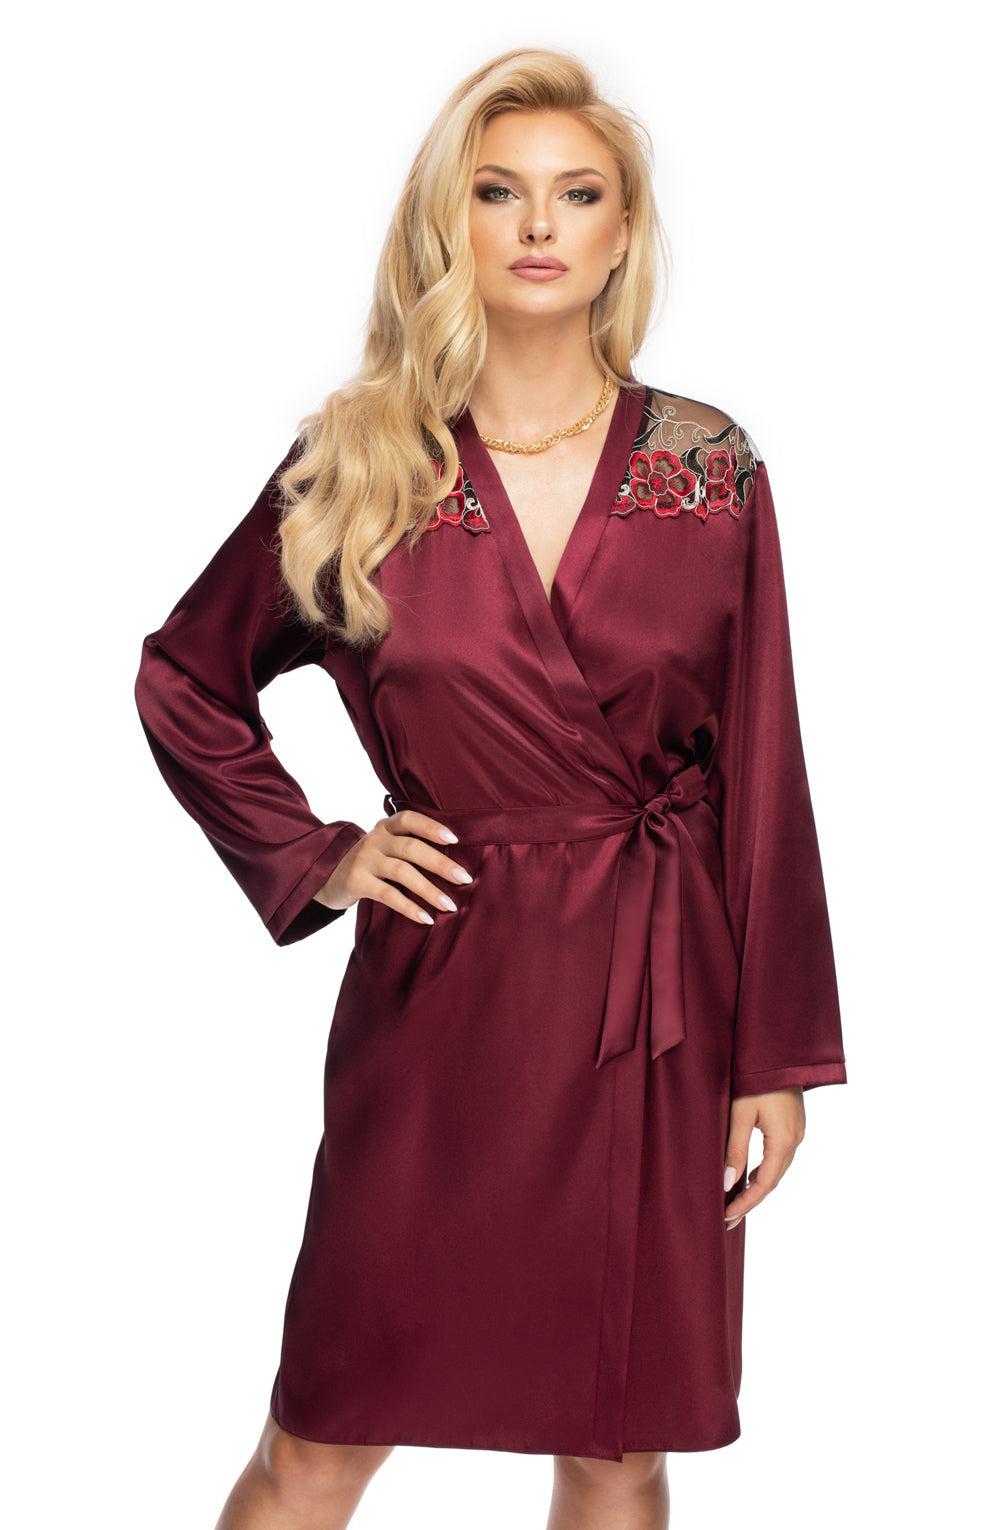 Irall Elodie Dressing Gown Plum-Katys Boutique